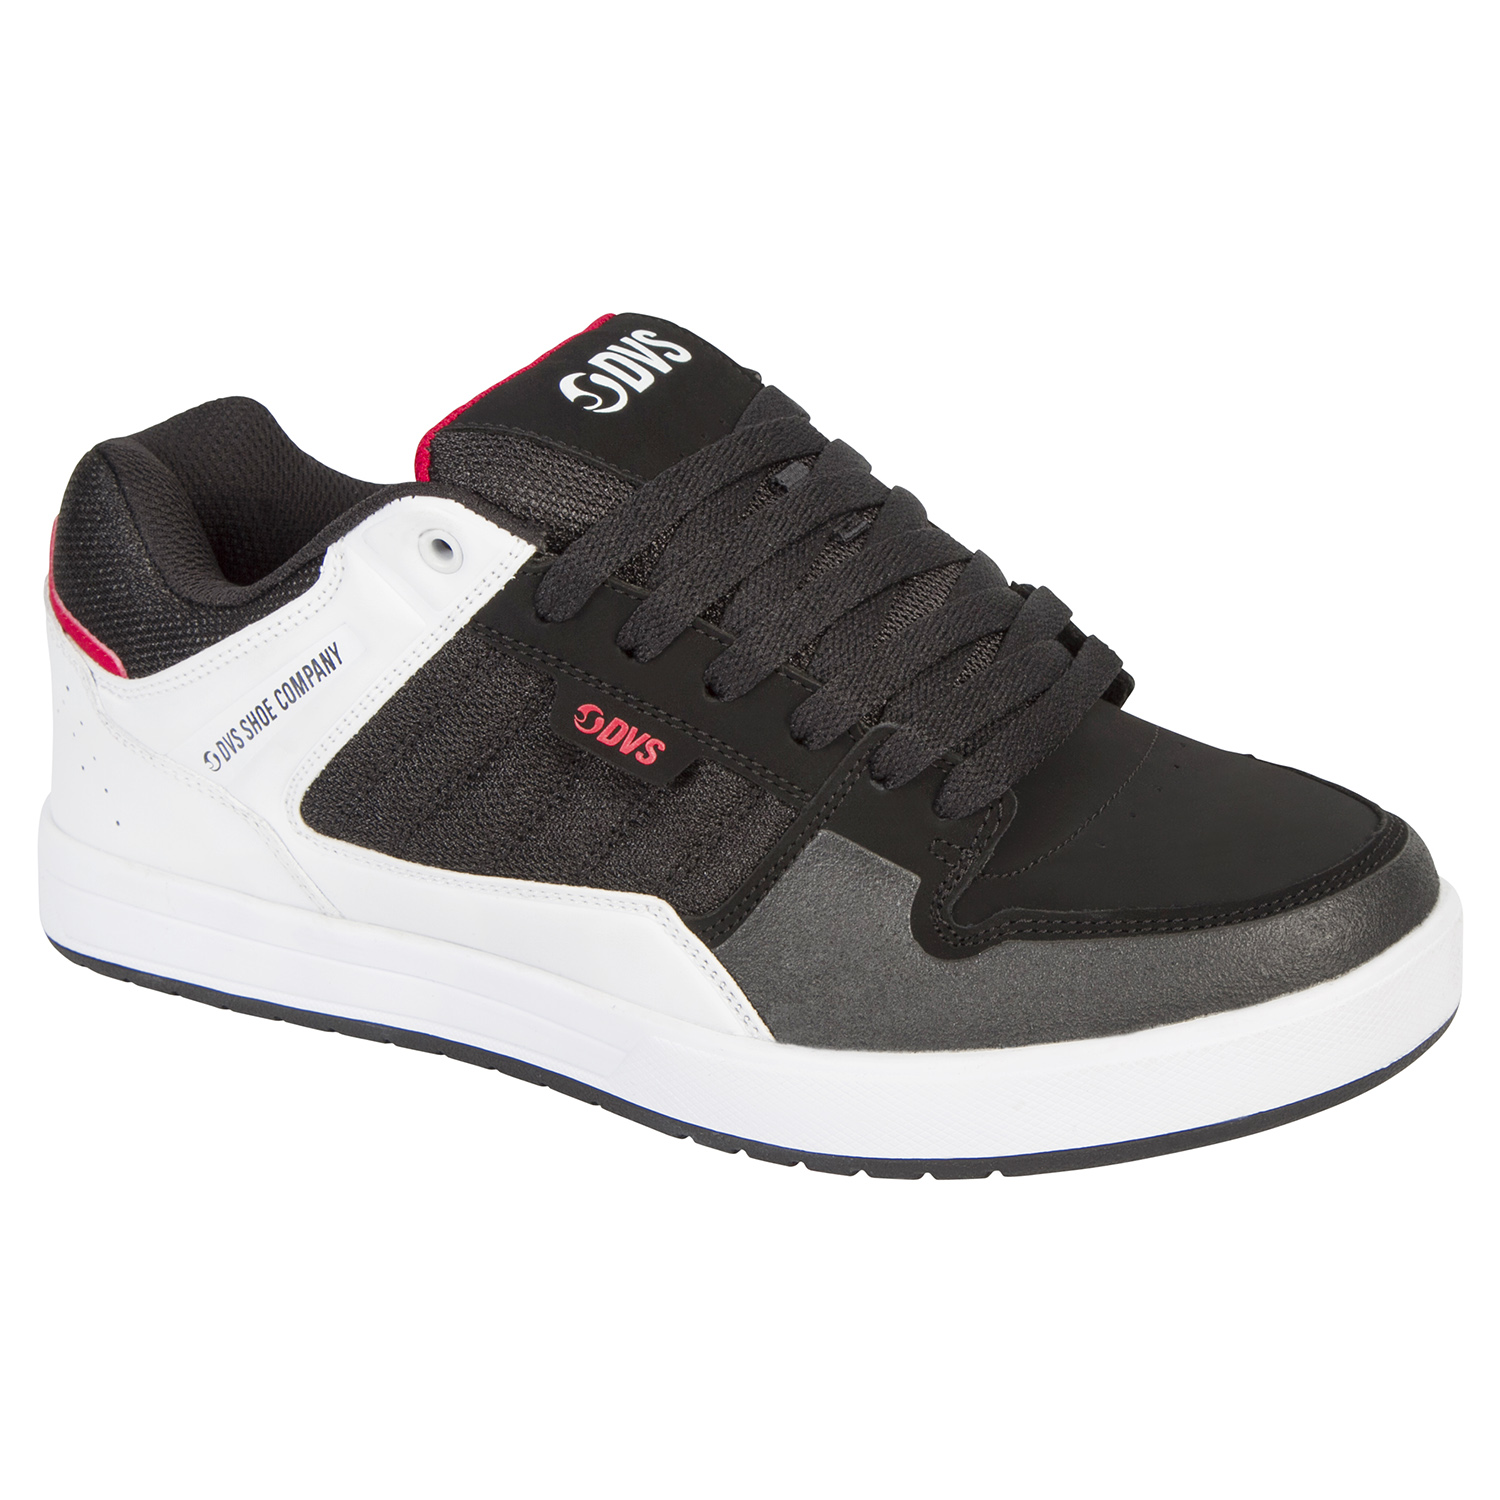 DVS Chaussures Portal Black/White/Red/Leather Nubucl